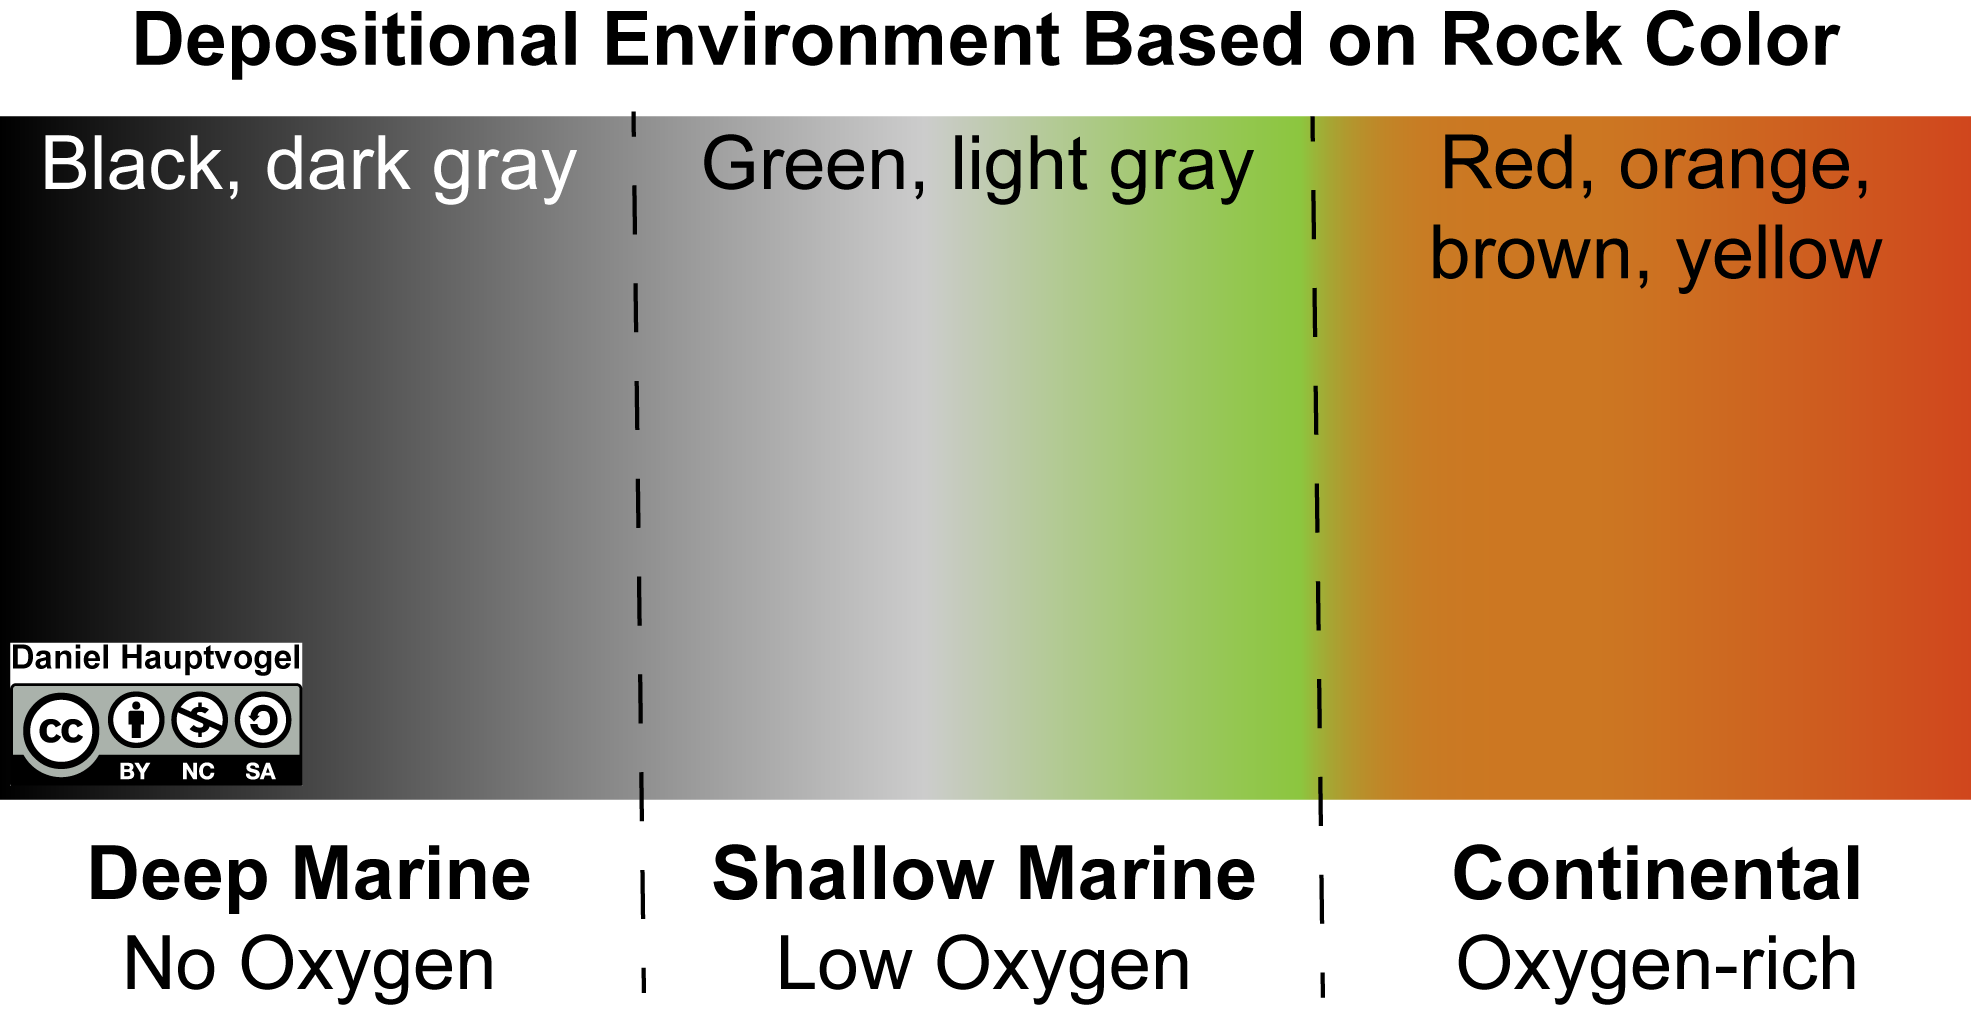 Depositional environment of sedimentary rocks based on rock color from black to gray to green to red-brown.